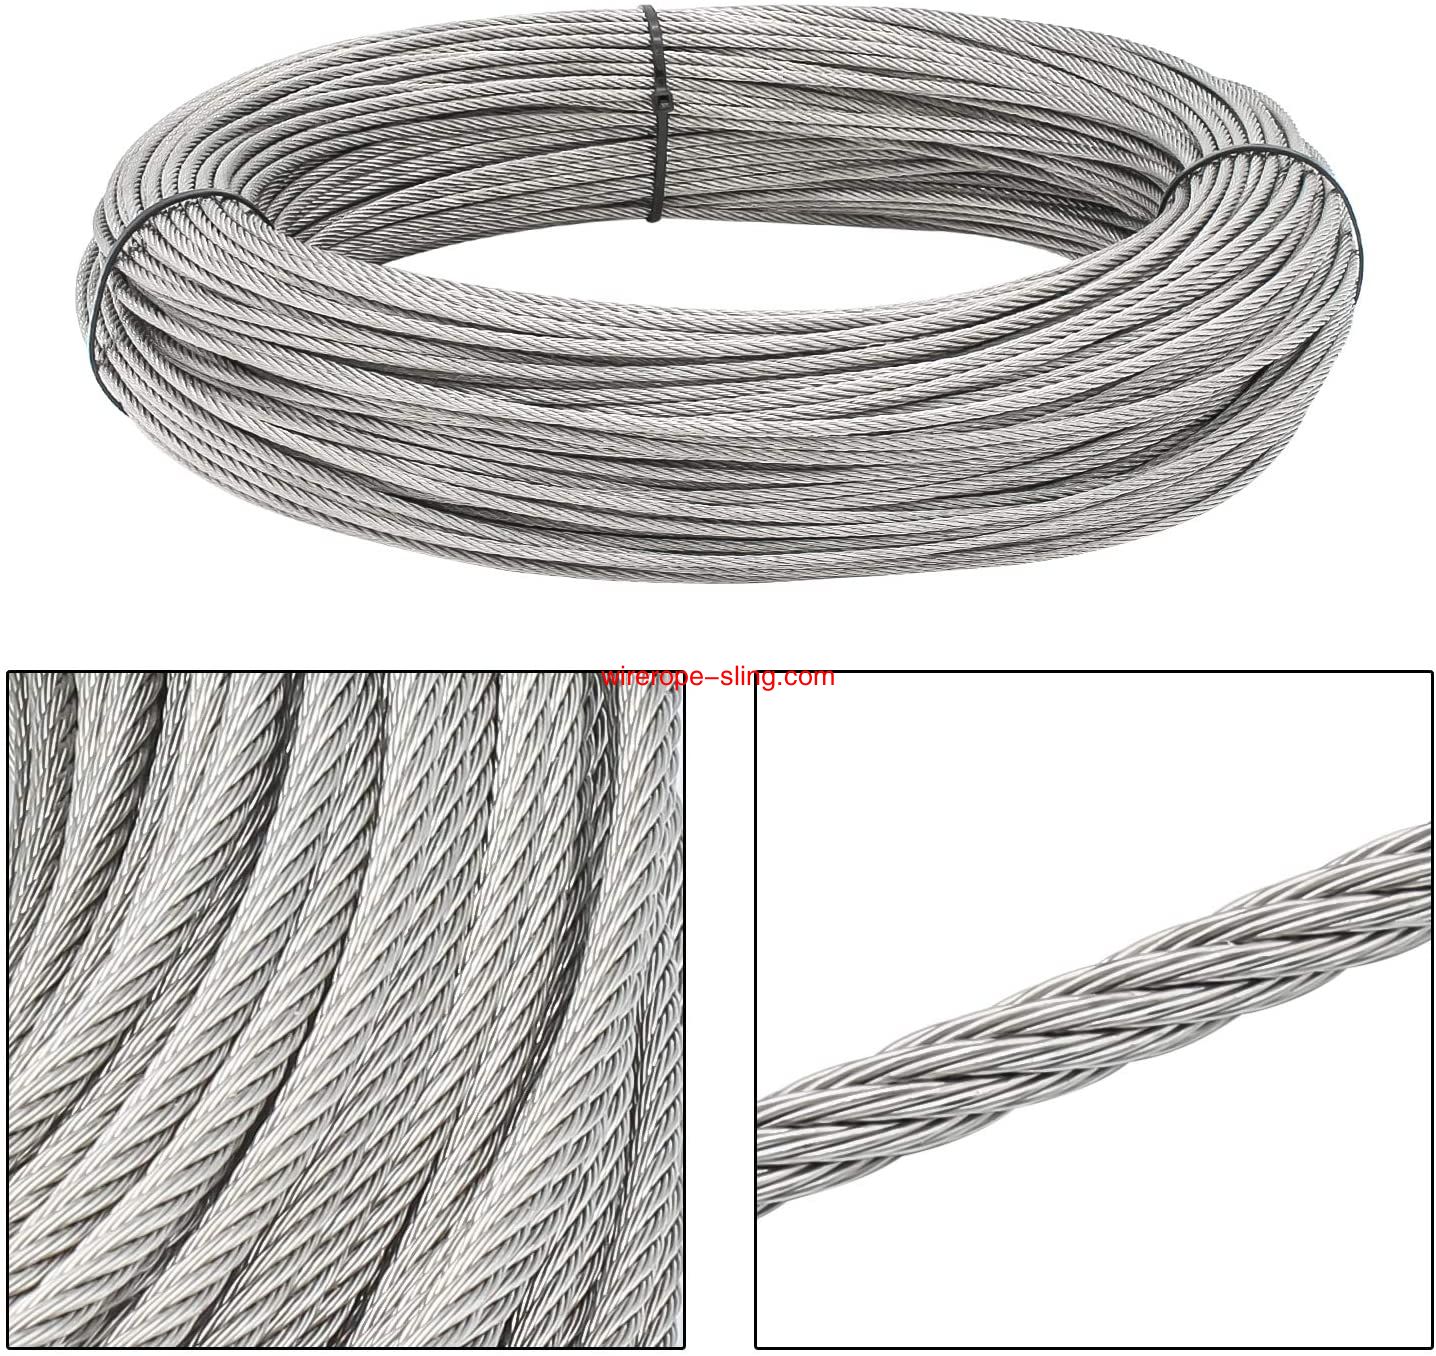 T316 Marin Grade 3mm Stainless Steel Aircraft Wire Rope Cable per Rail, Decking, DIY Balustrade, 100 Feet